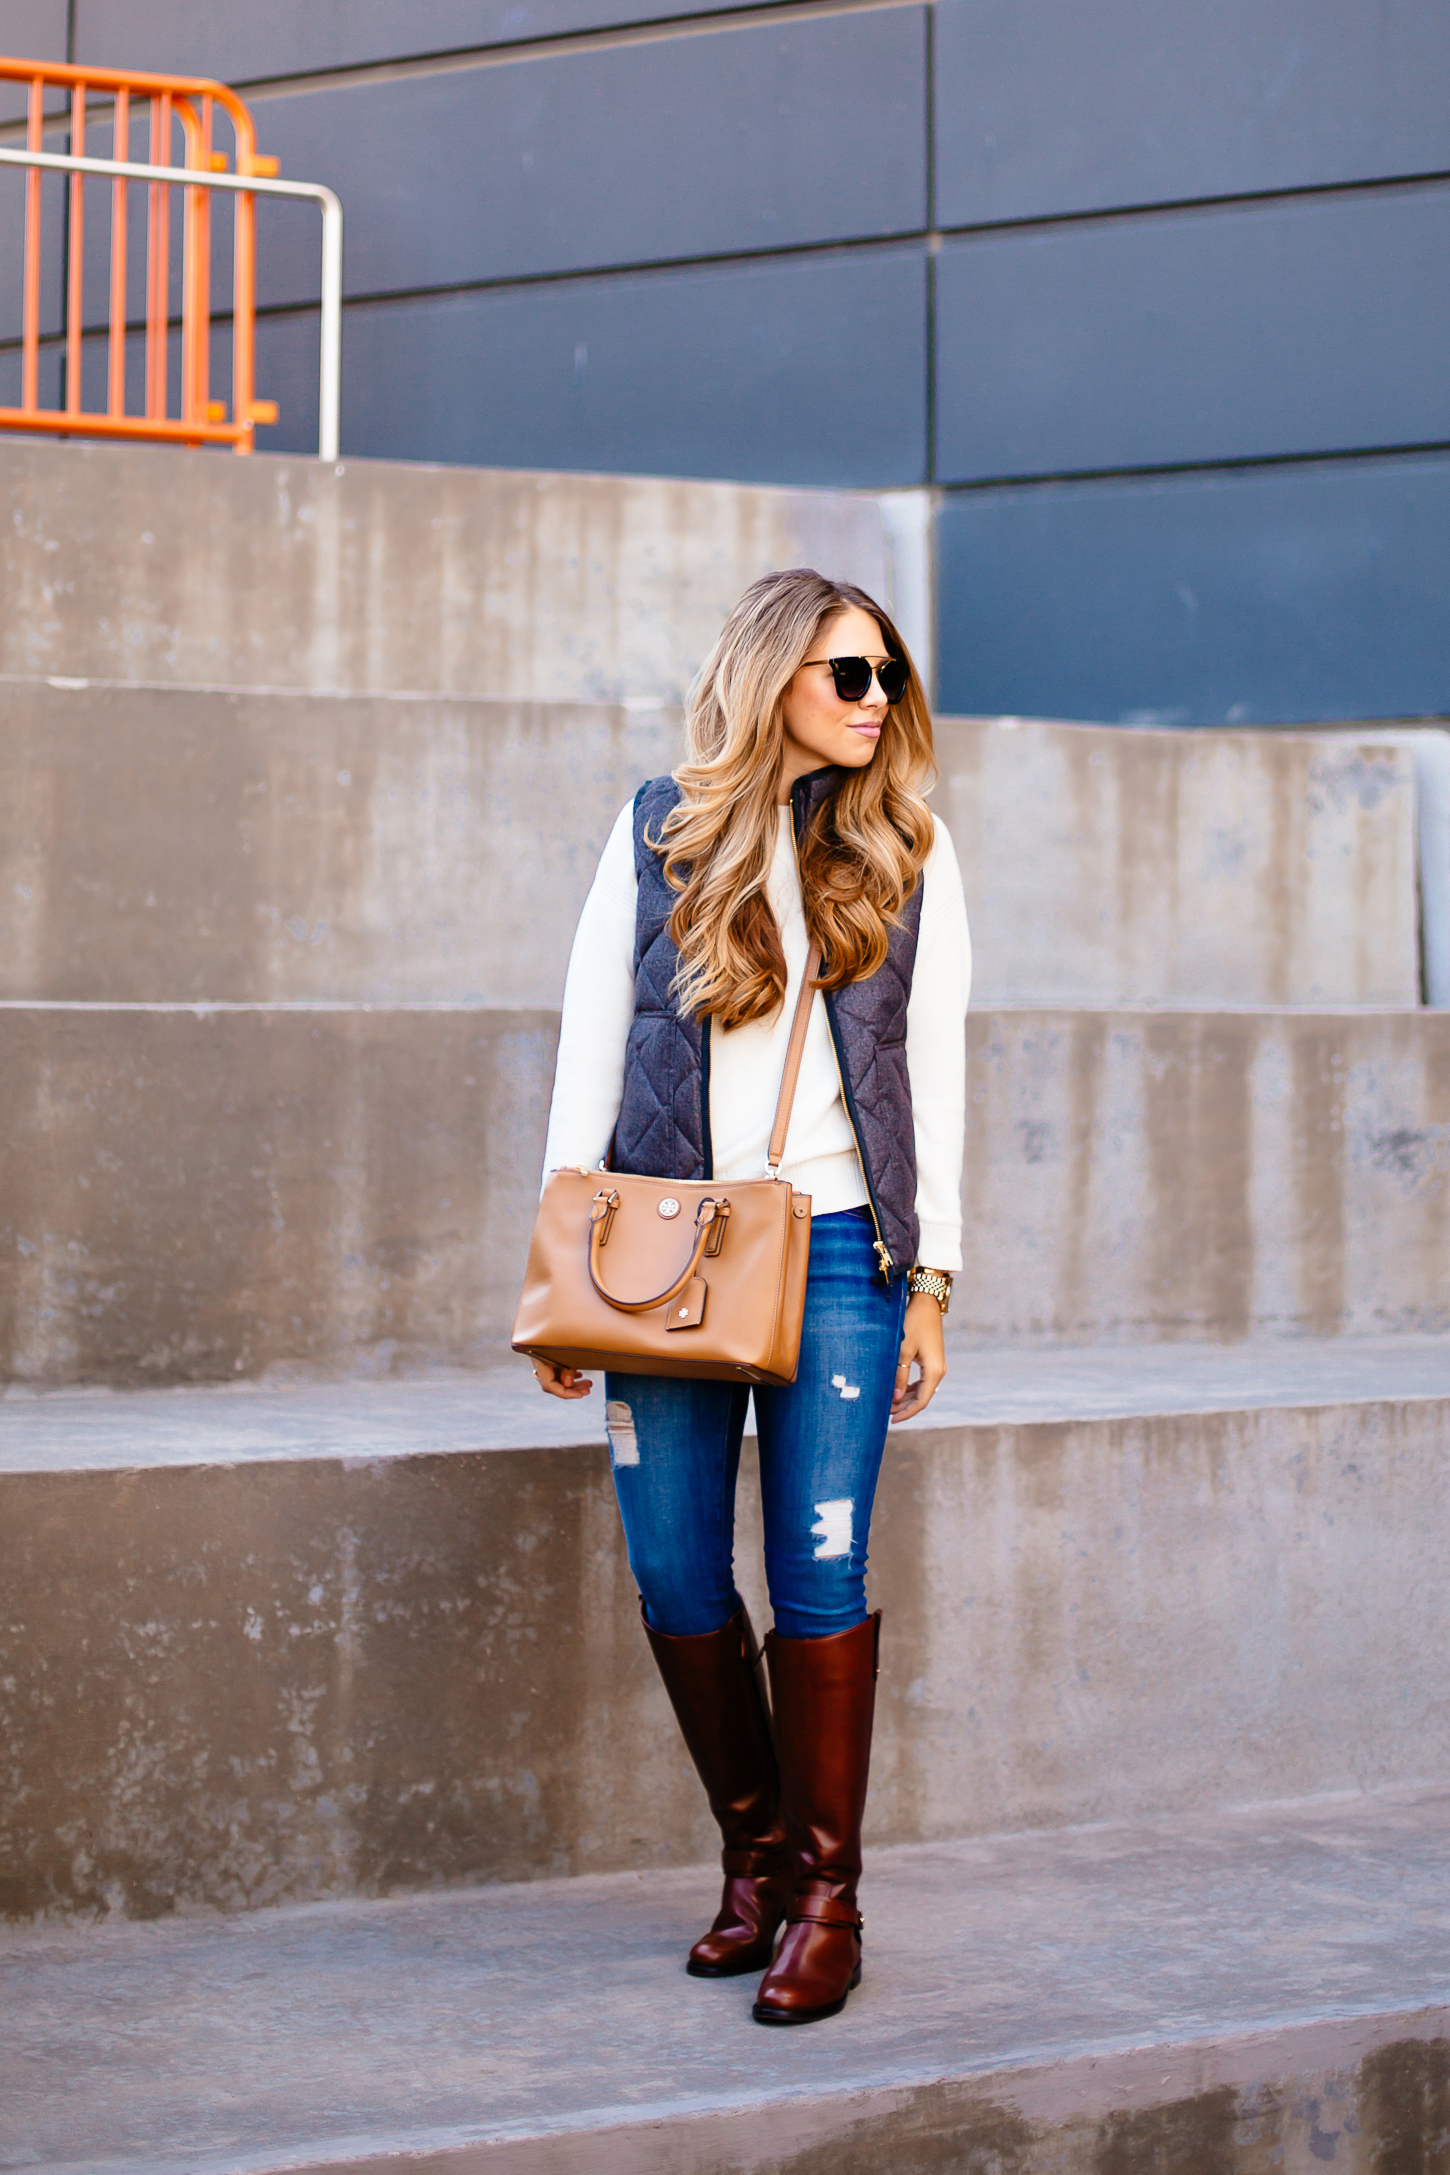 Quilted Vest & Riding Boots  The Teacher Diva: a Dallas Fashion Blog  featuring Beauty & Lifestyle